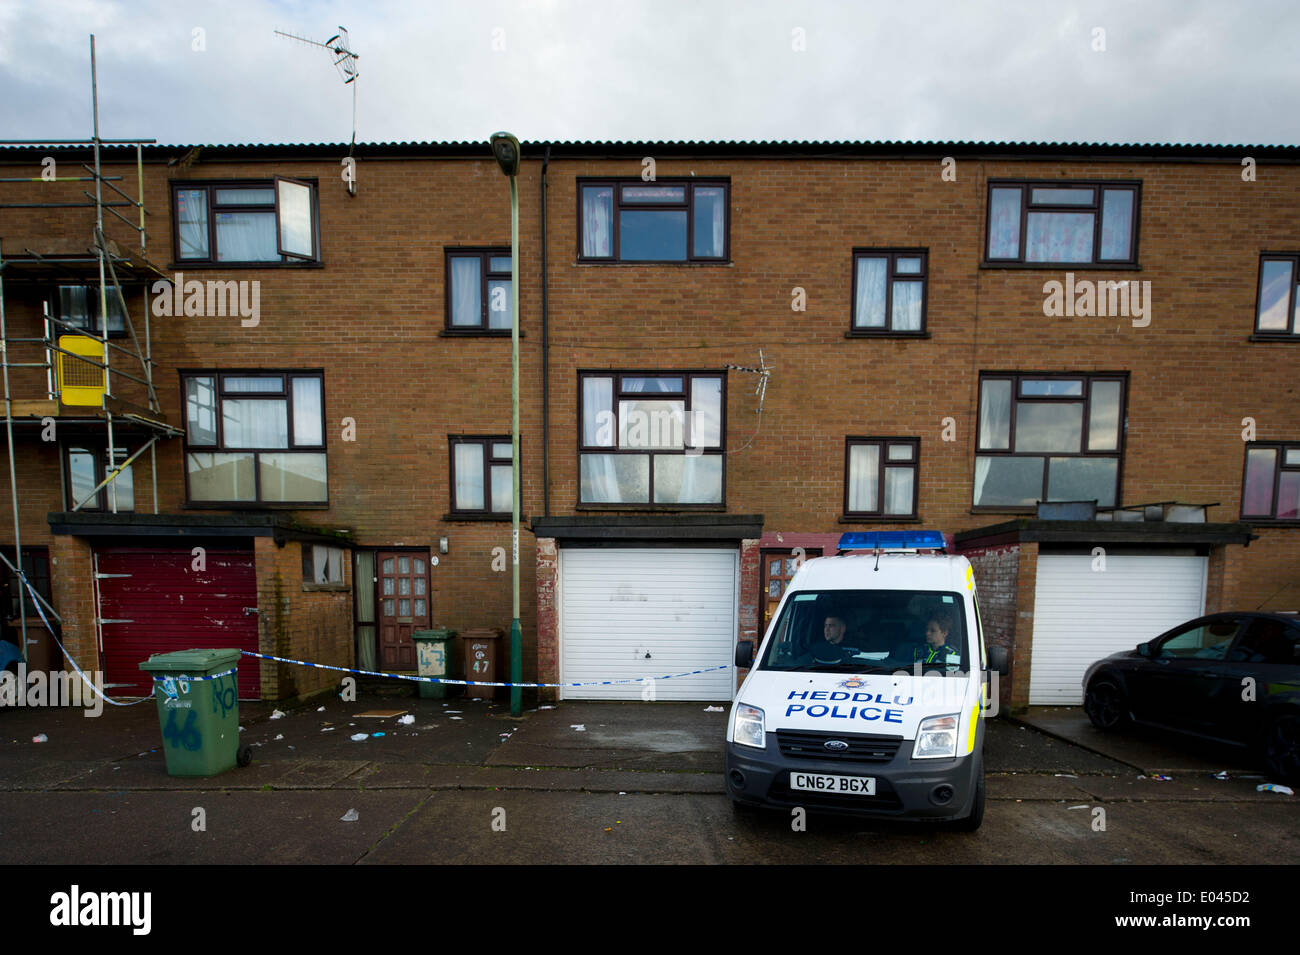 Caerphilly, Wales, UK. 1st May 2014. A 24-year-old man is in a serious but stable condition after a triple stabbing on Snowden Court, Lansbury Park, Caerphilly last night. A 23-year-old man and woman were also stabbed.  (Photo by Matthew Horwood/Alamy Live News) Stock Photo